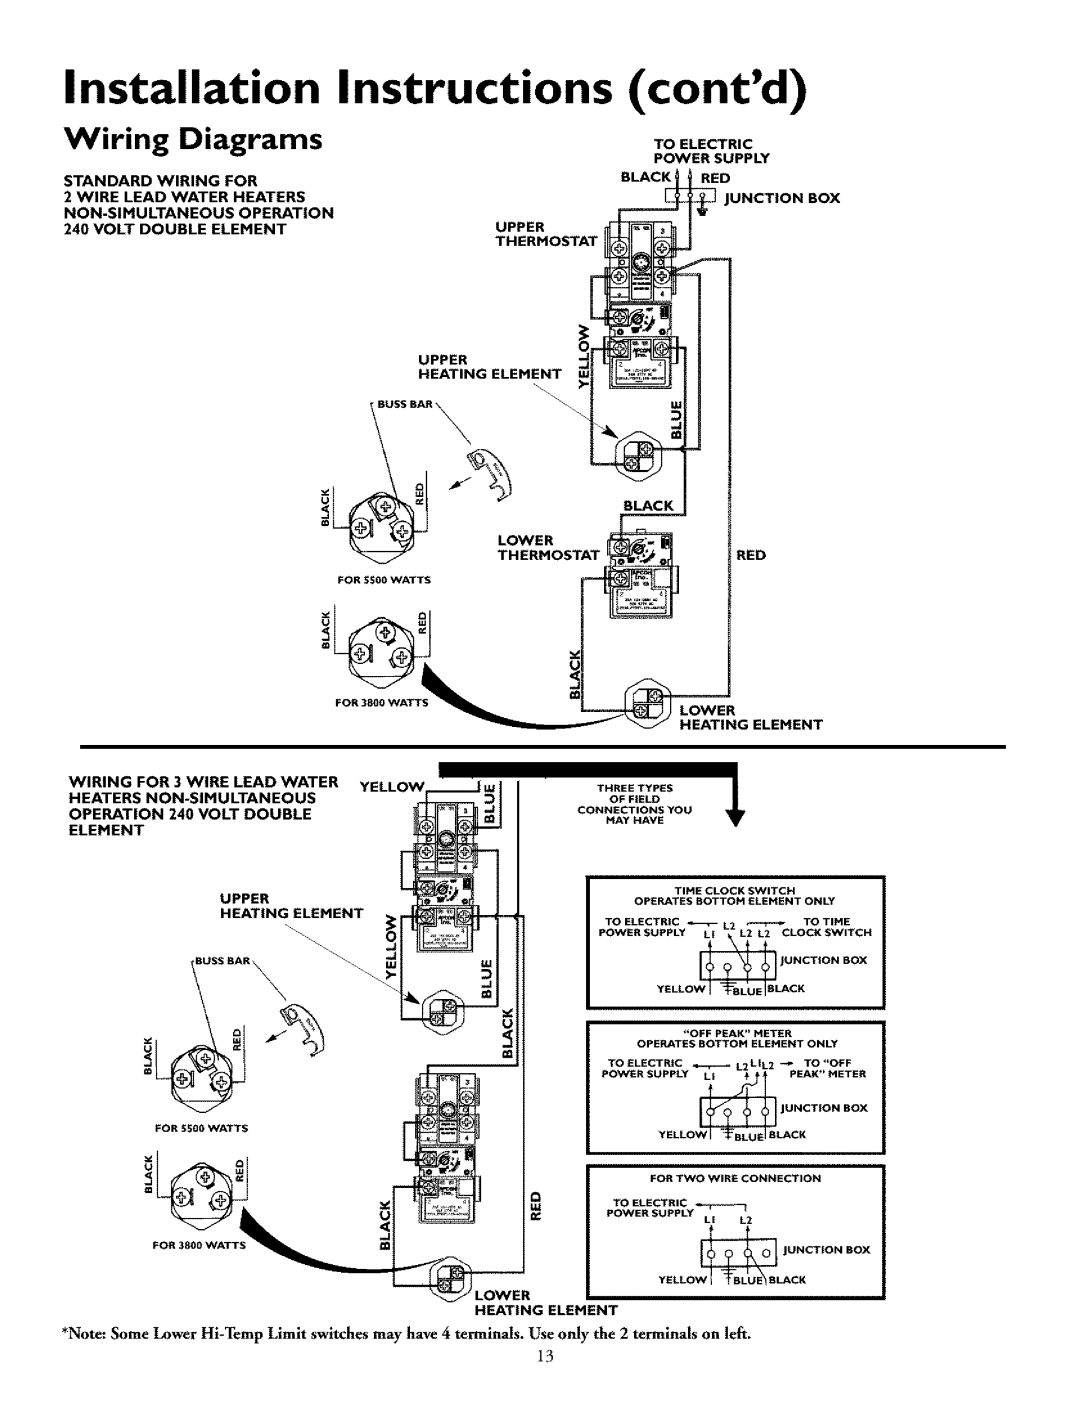 Kenmore 153.326561, 153.326761, 153.32686, 153.326361, 153.326461, 153.326661 Installation Instructions contd, Wiring Diagrams 